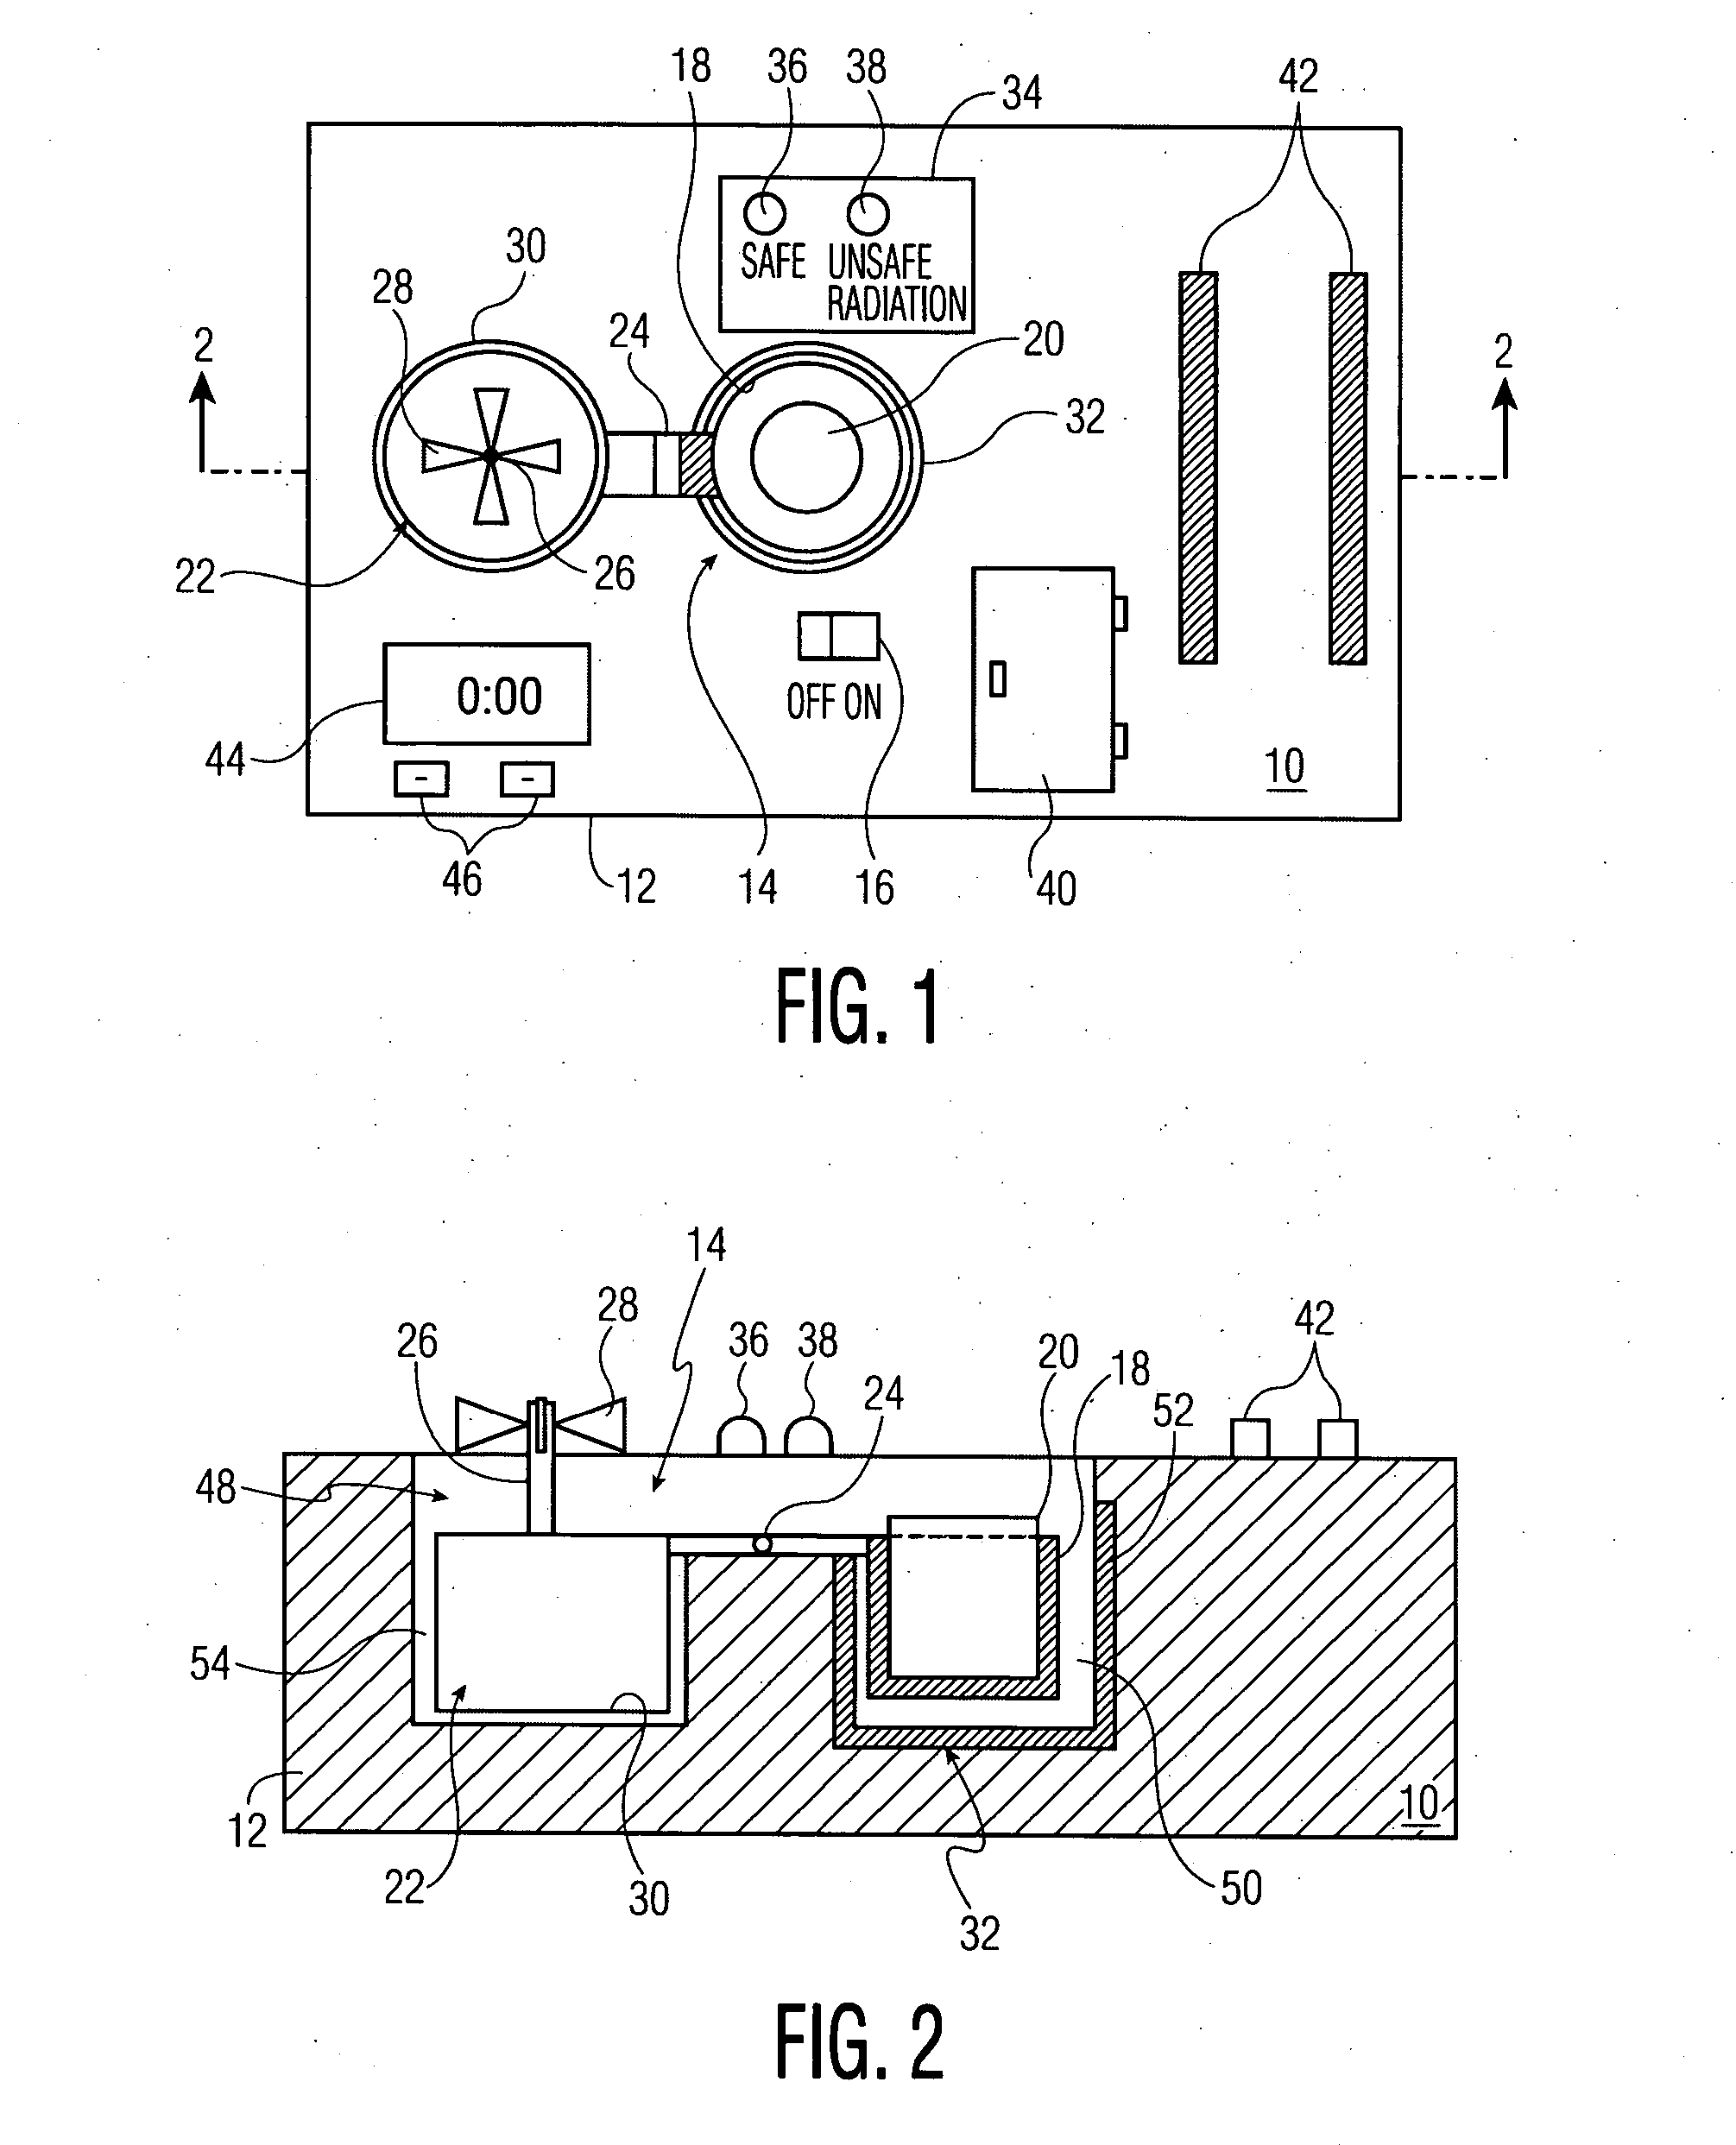 Consumer food testing device